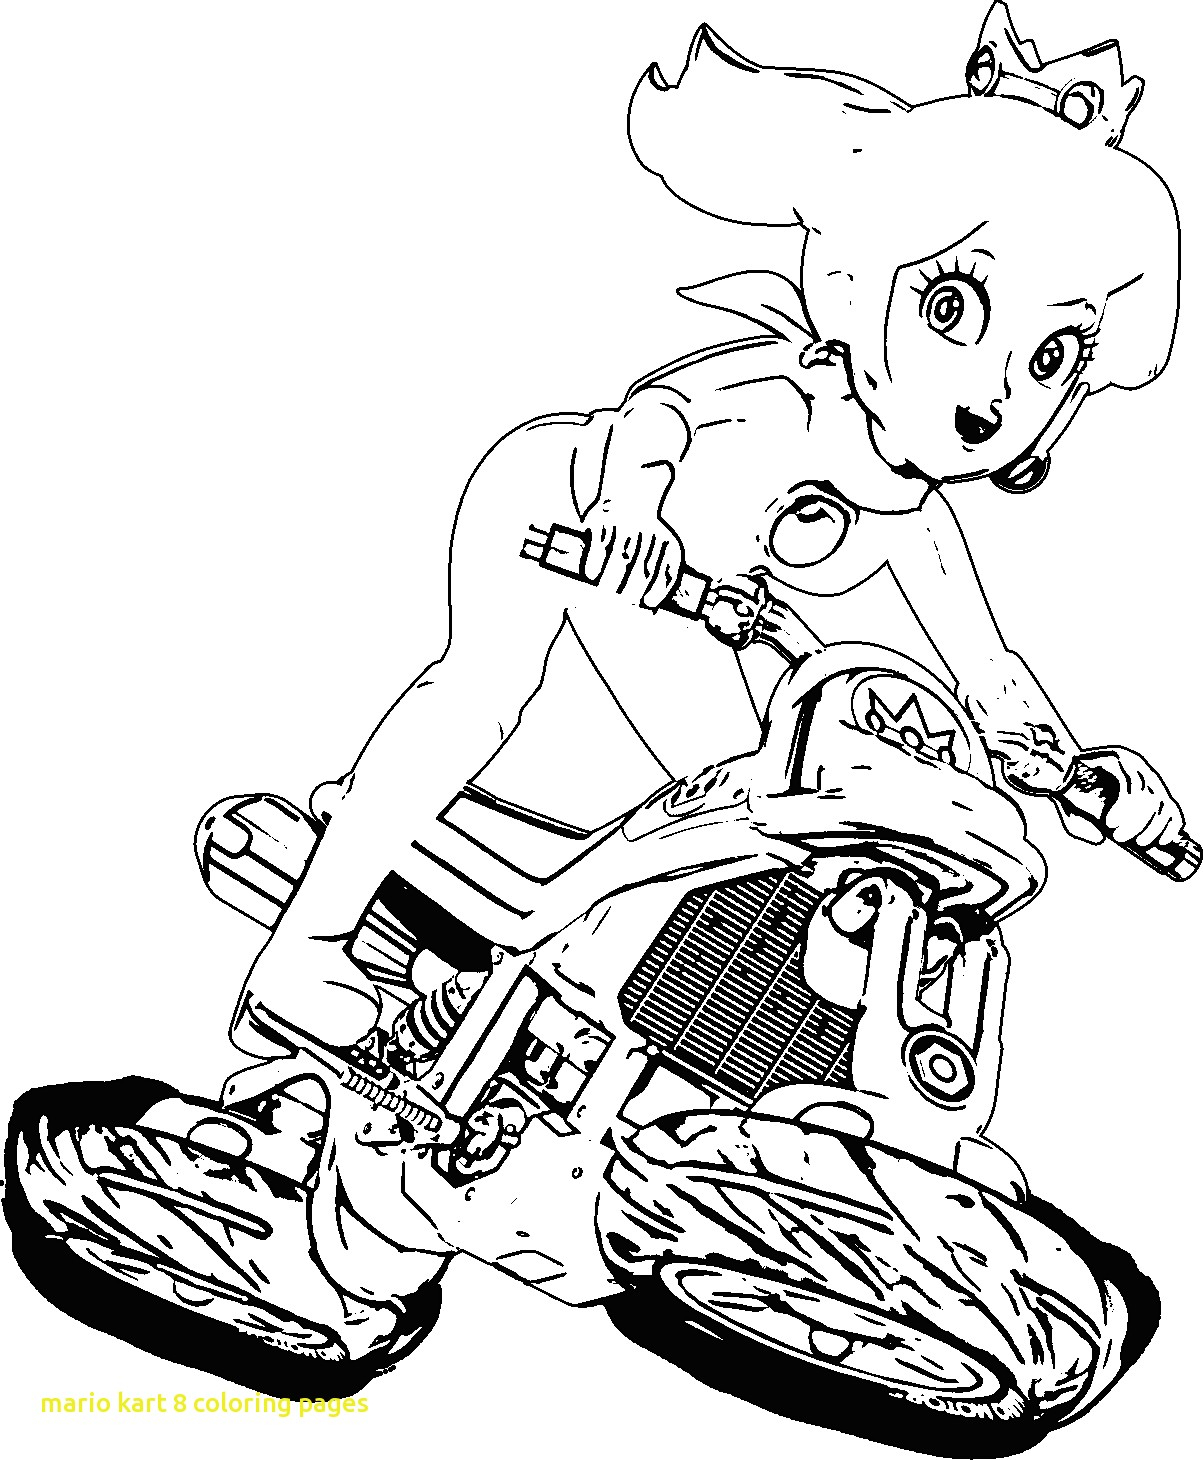 Peach From Mario Coloring Pages Princess Peach Mario Kart Coloring Pages